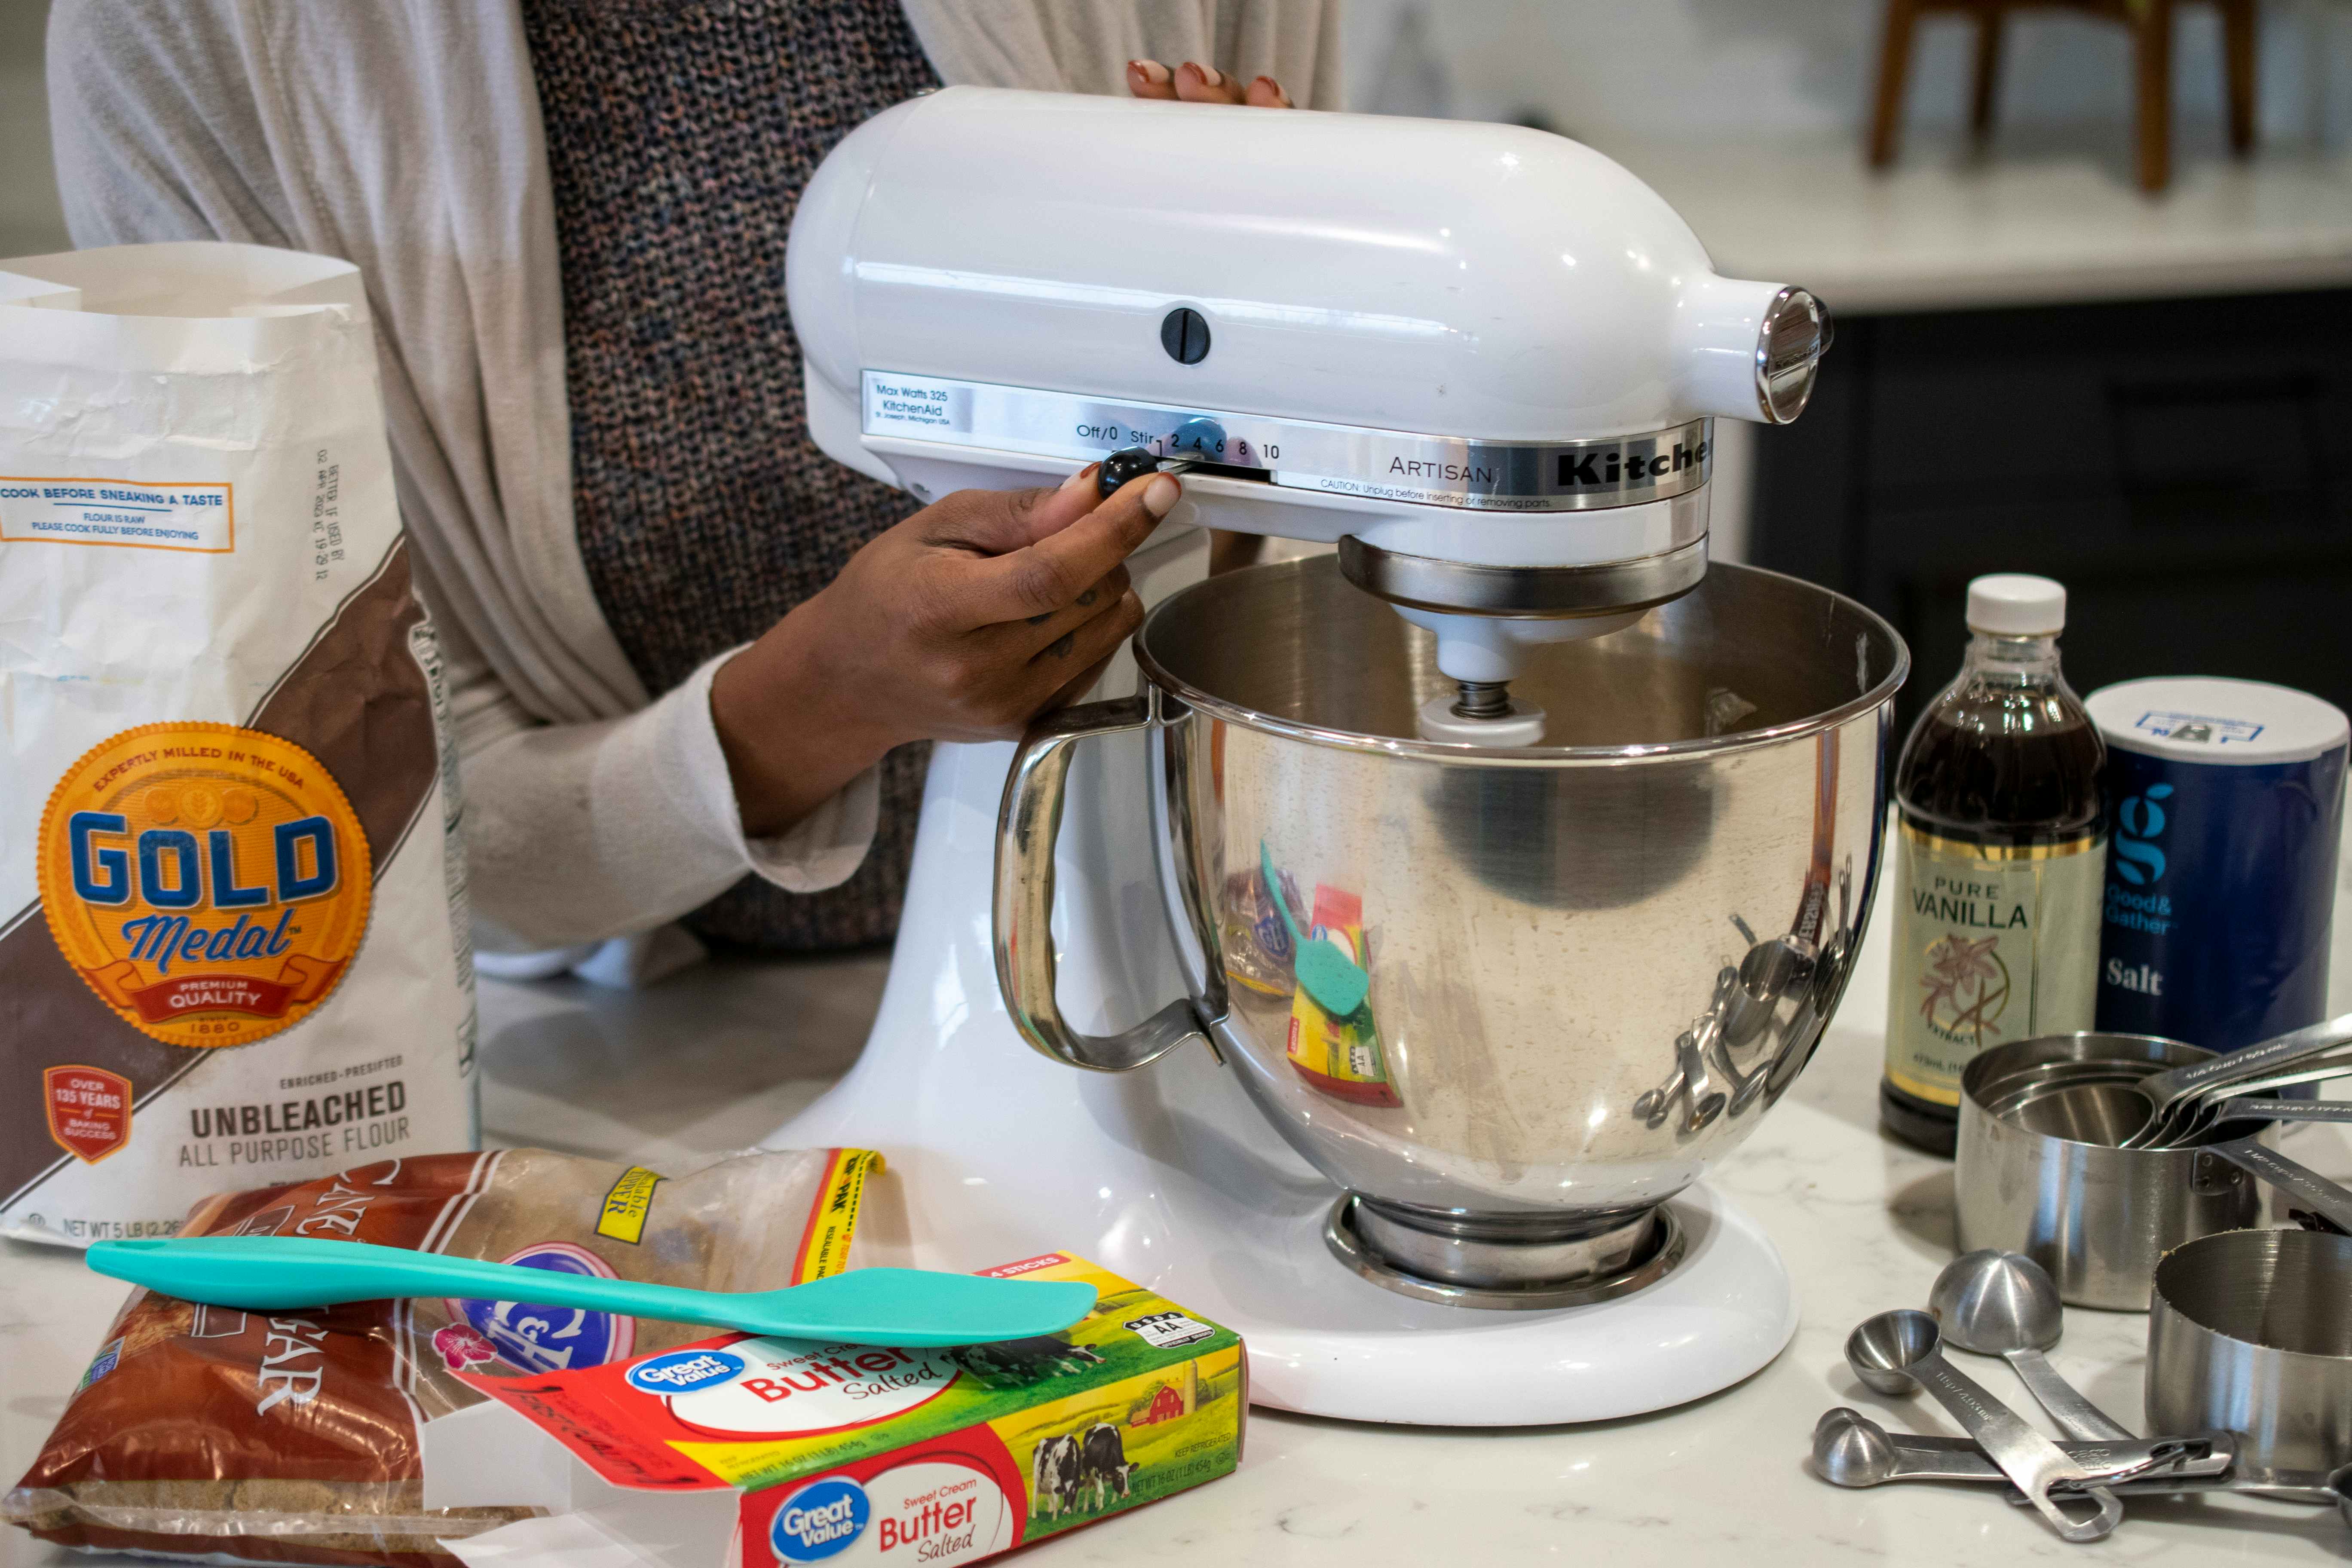 What to Do if Your KitchenAid Stand Mixer is Leaking Oil